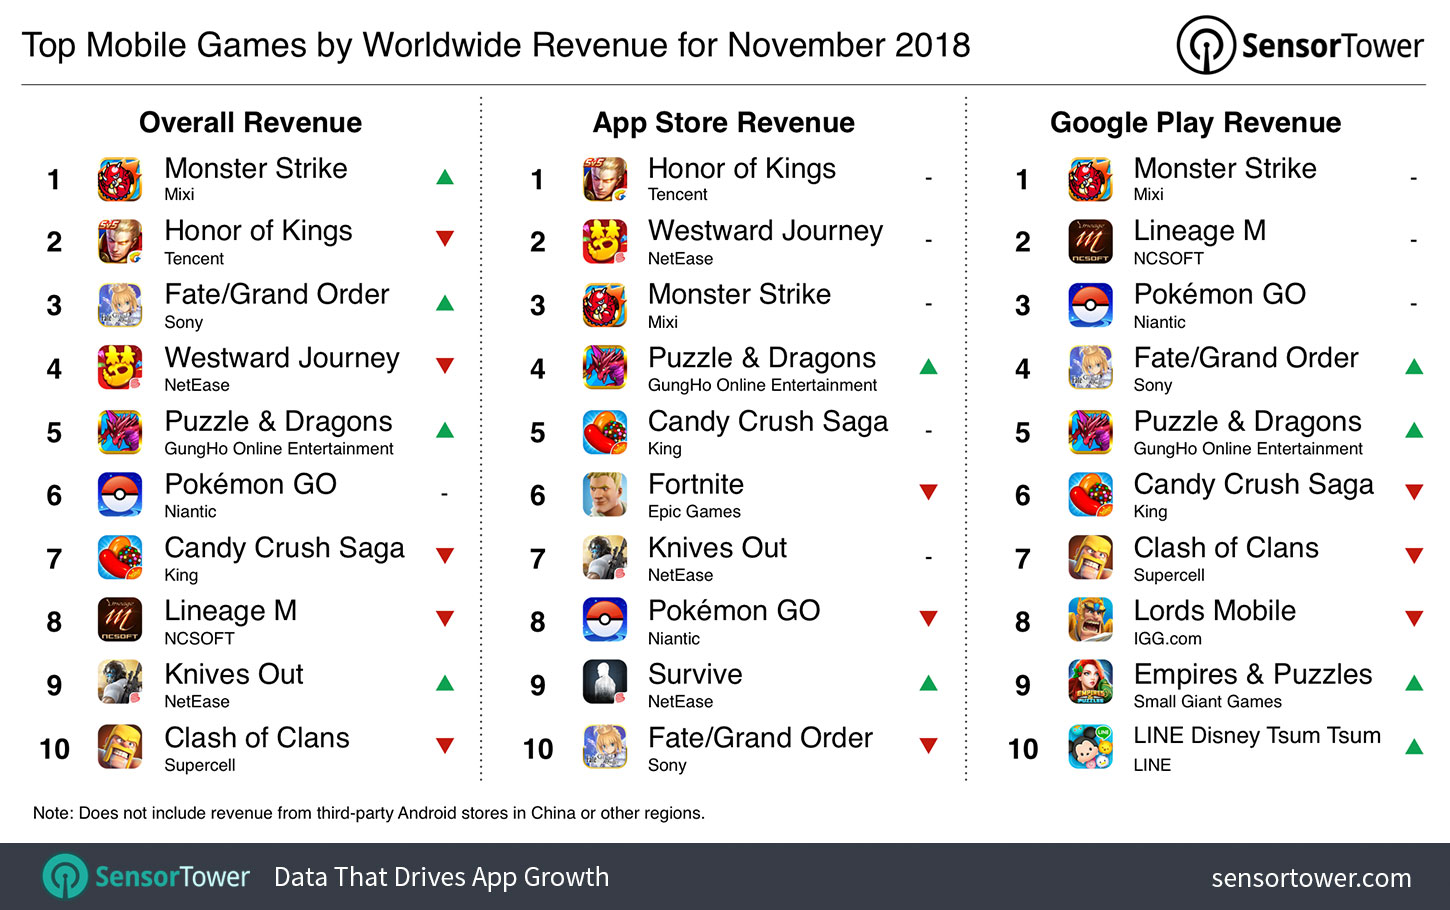 Top Mobile Games by Revenue for November 2018